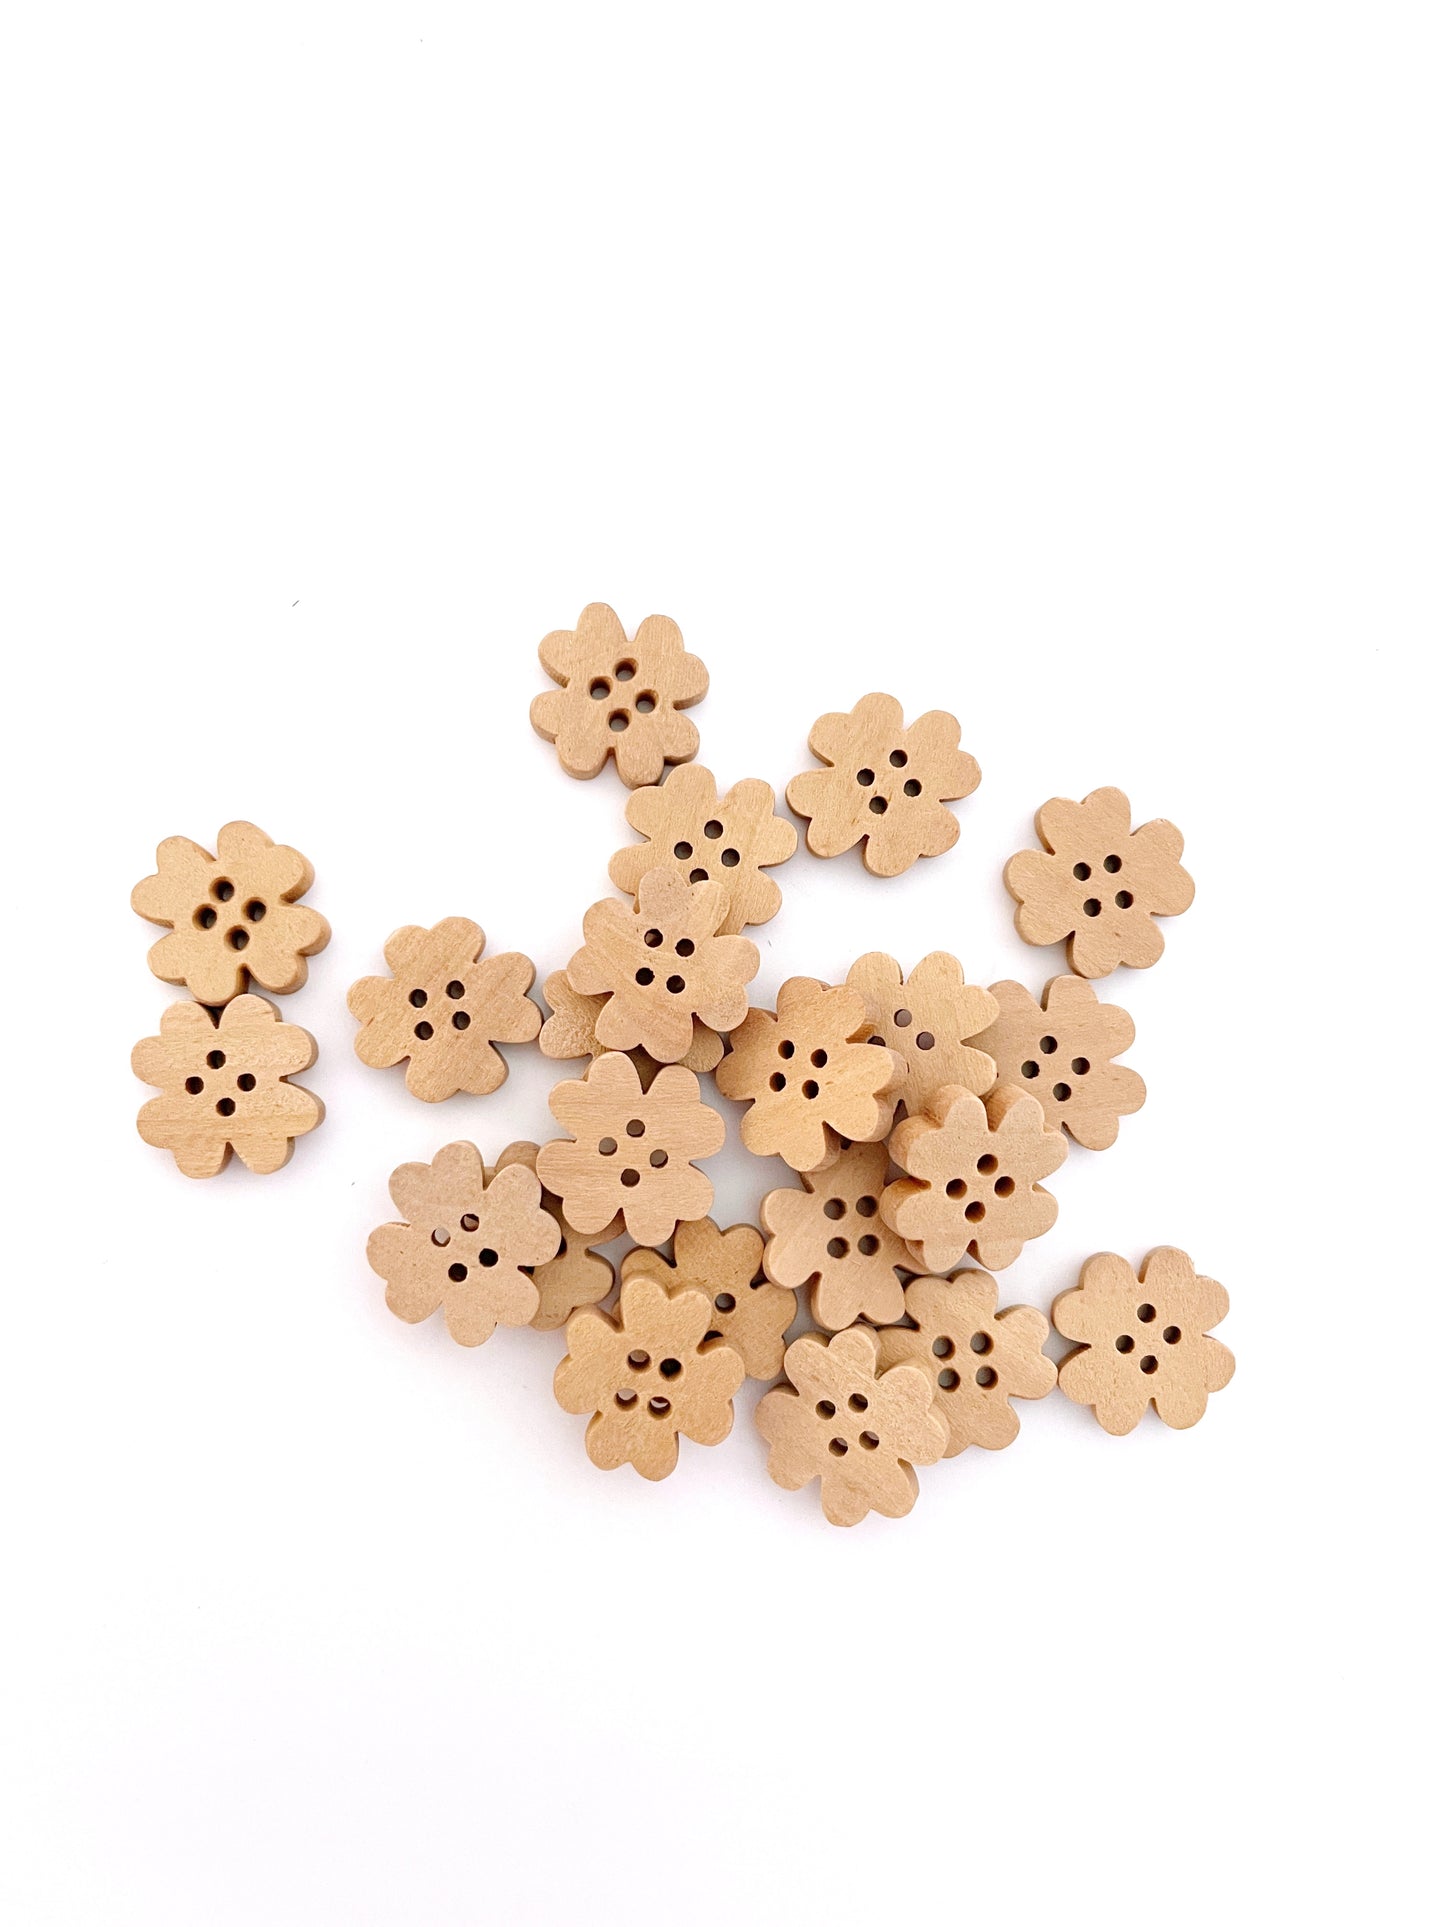 Fancy Wooden buttons - pack of 7 - DWB02